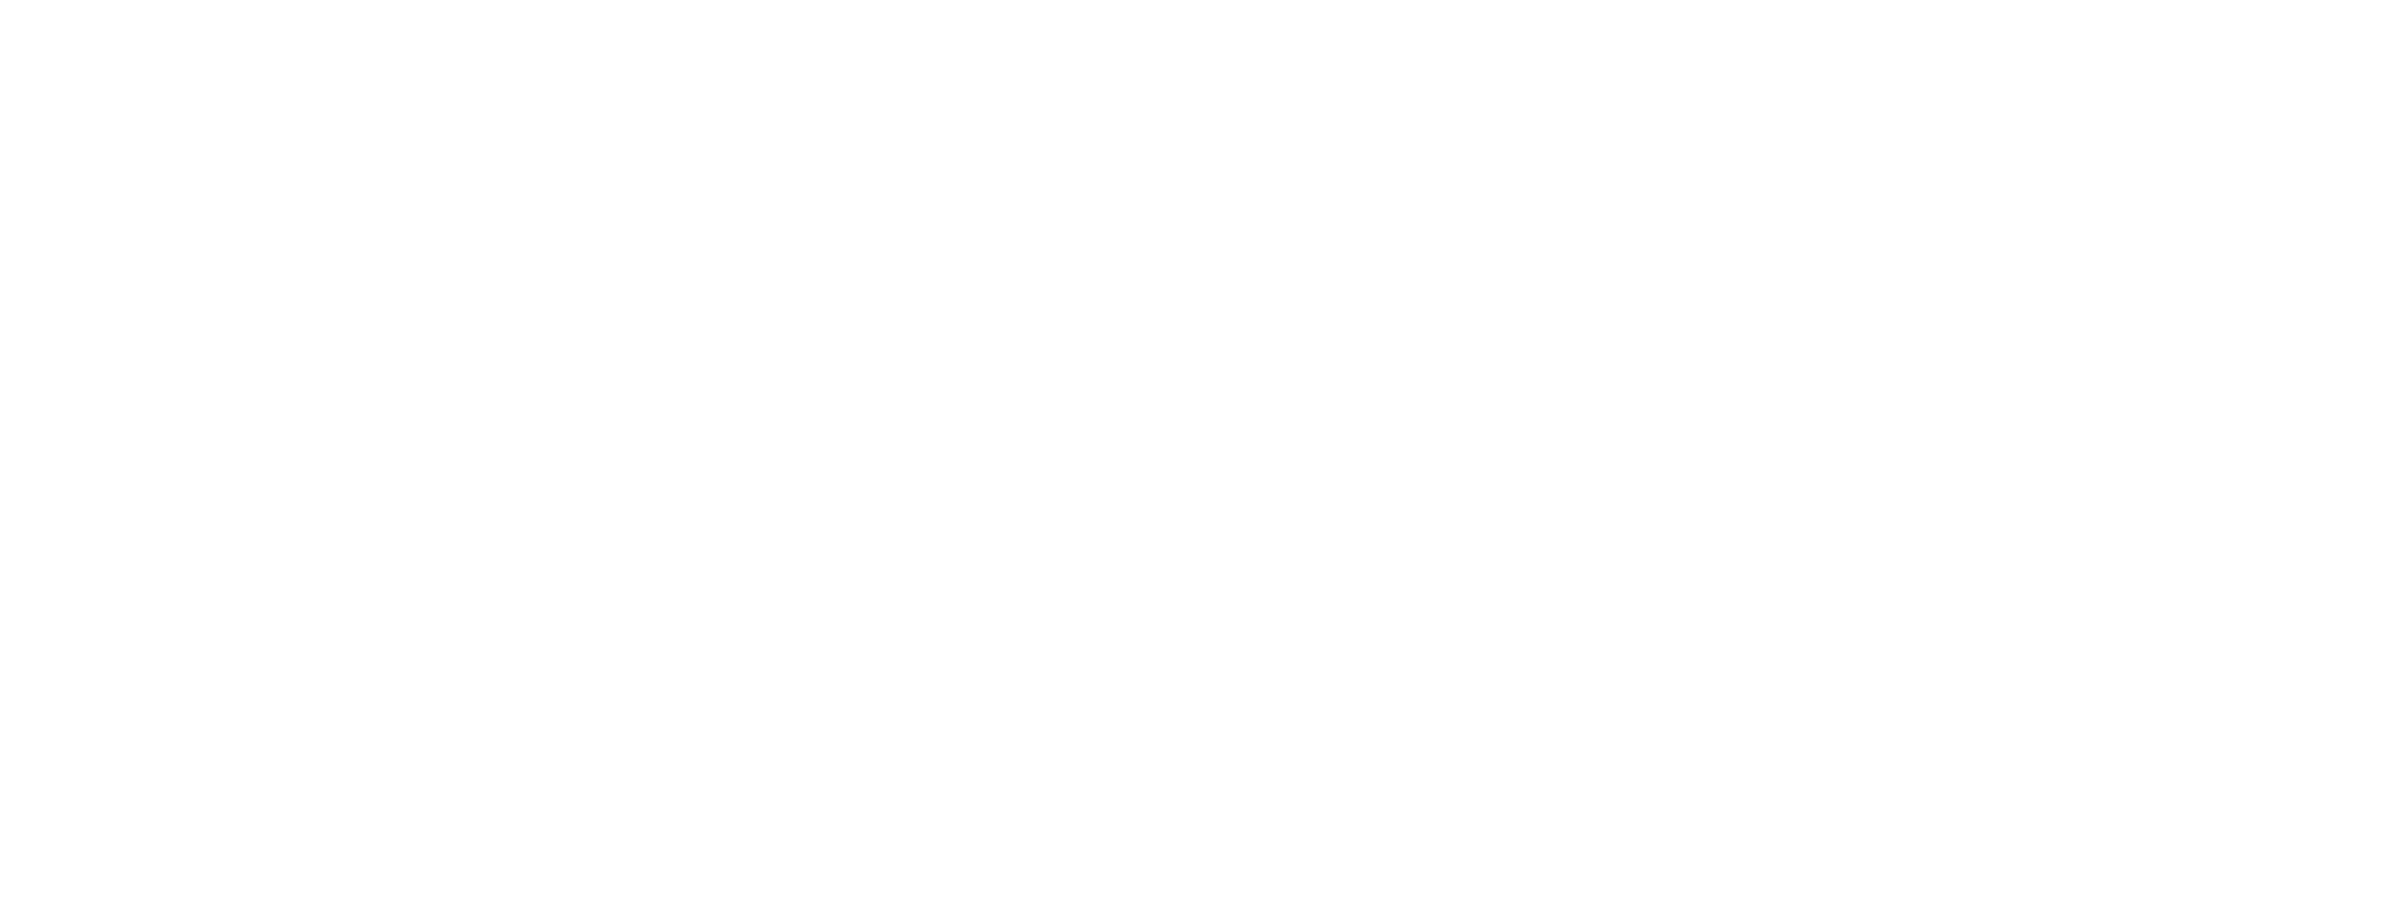 te-connectivity-logo-black-and-white